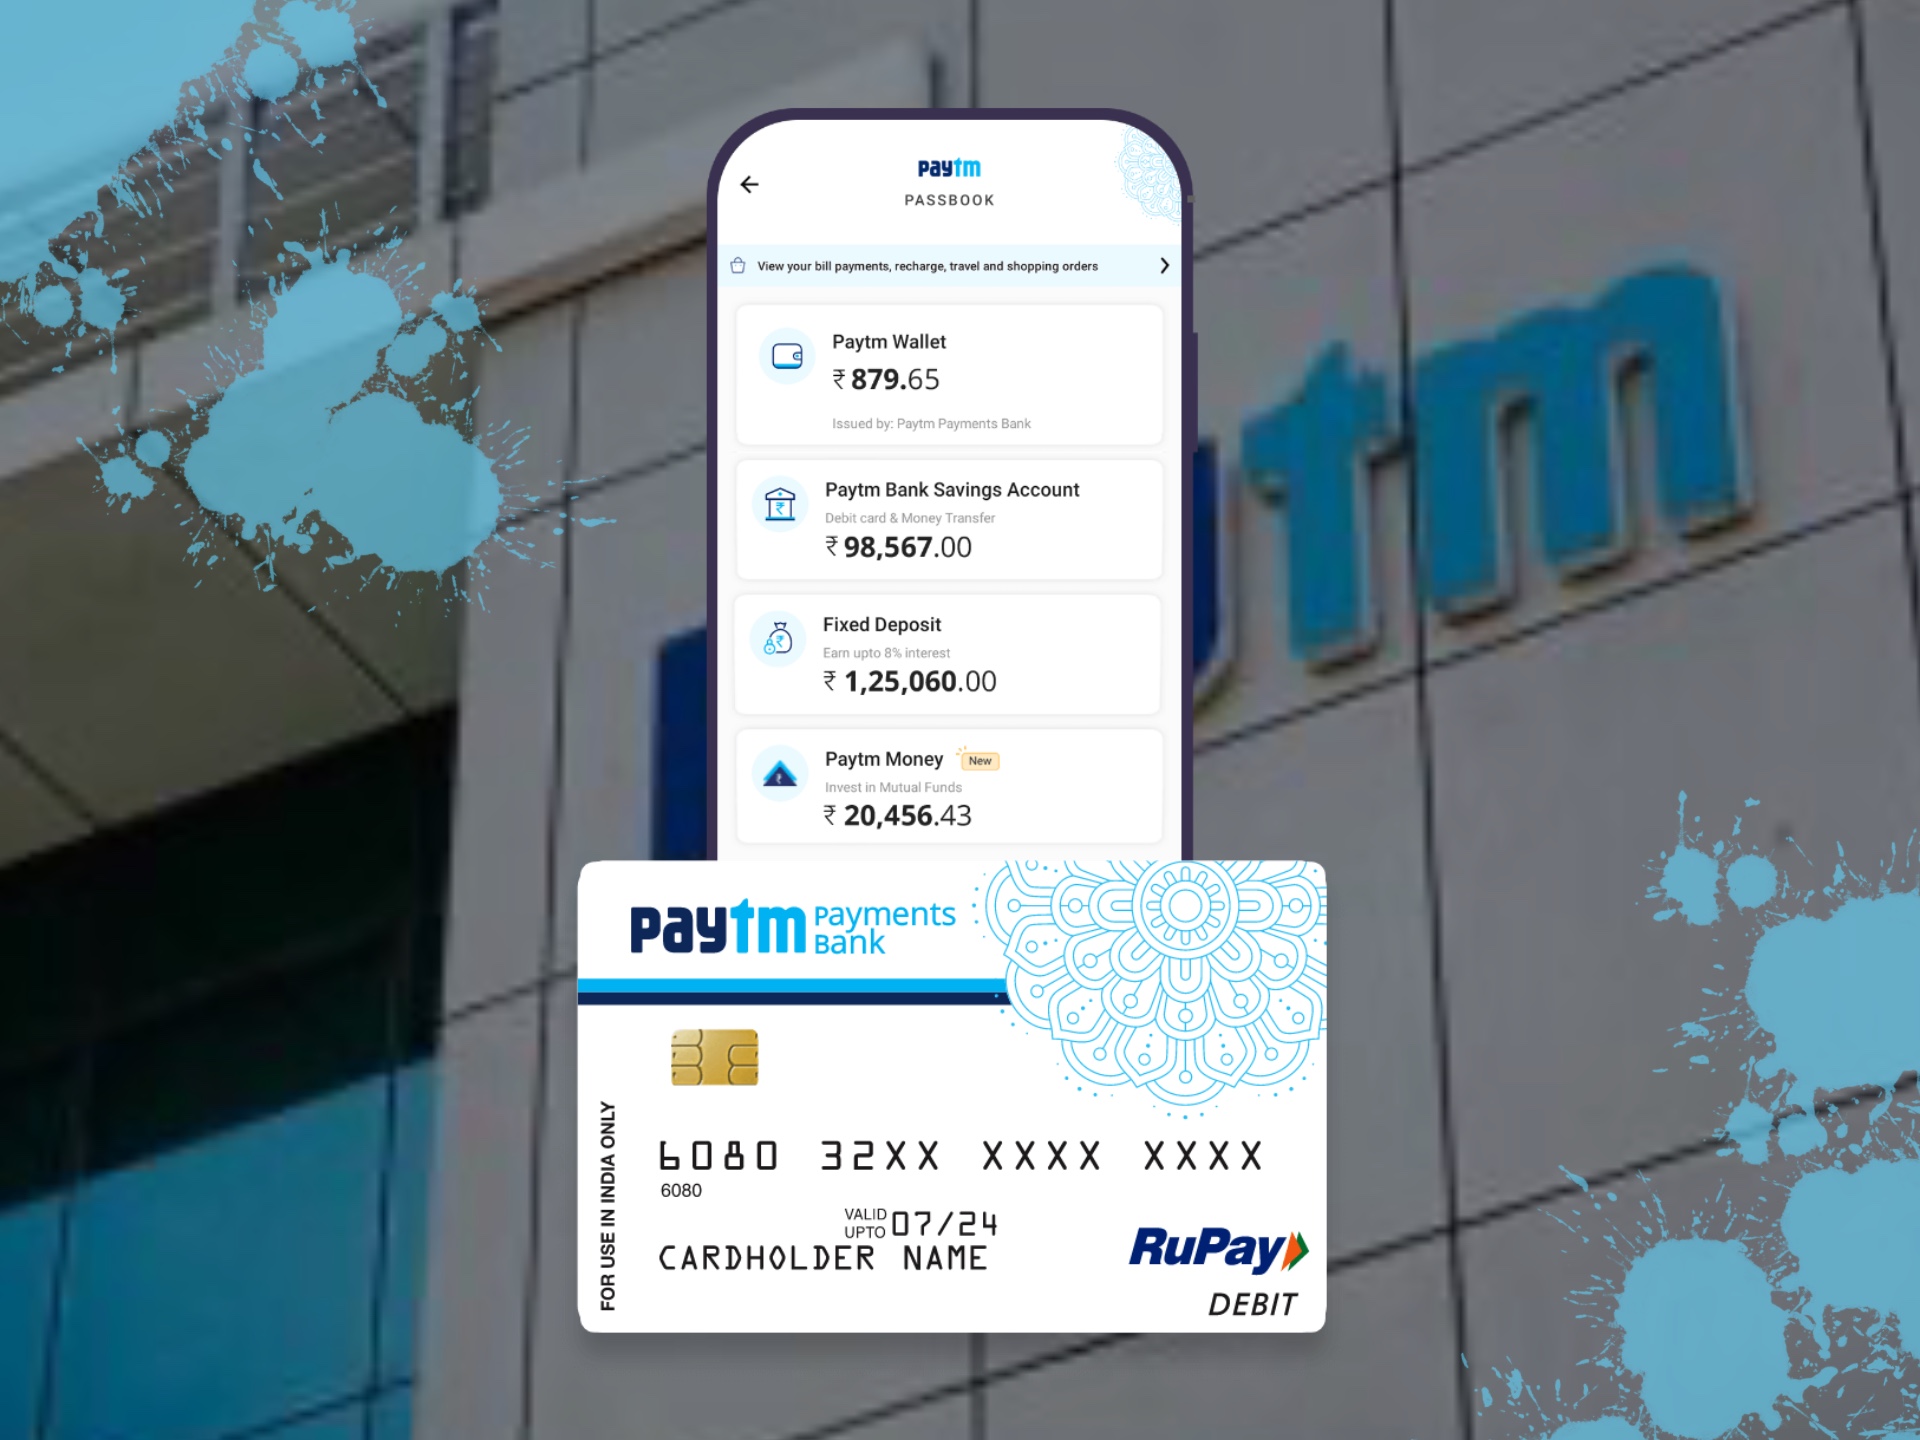 It's easy to withdraw money on youyr bank account with the help of Paytm.